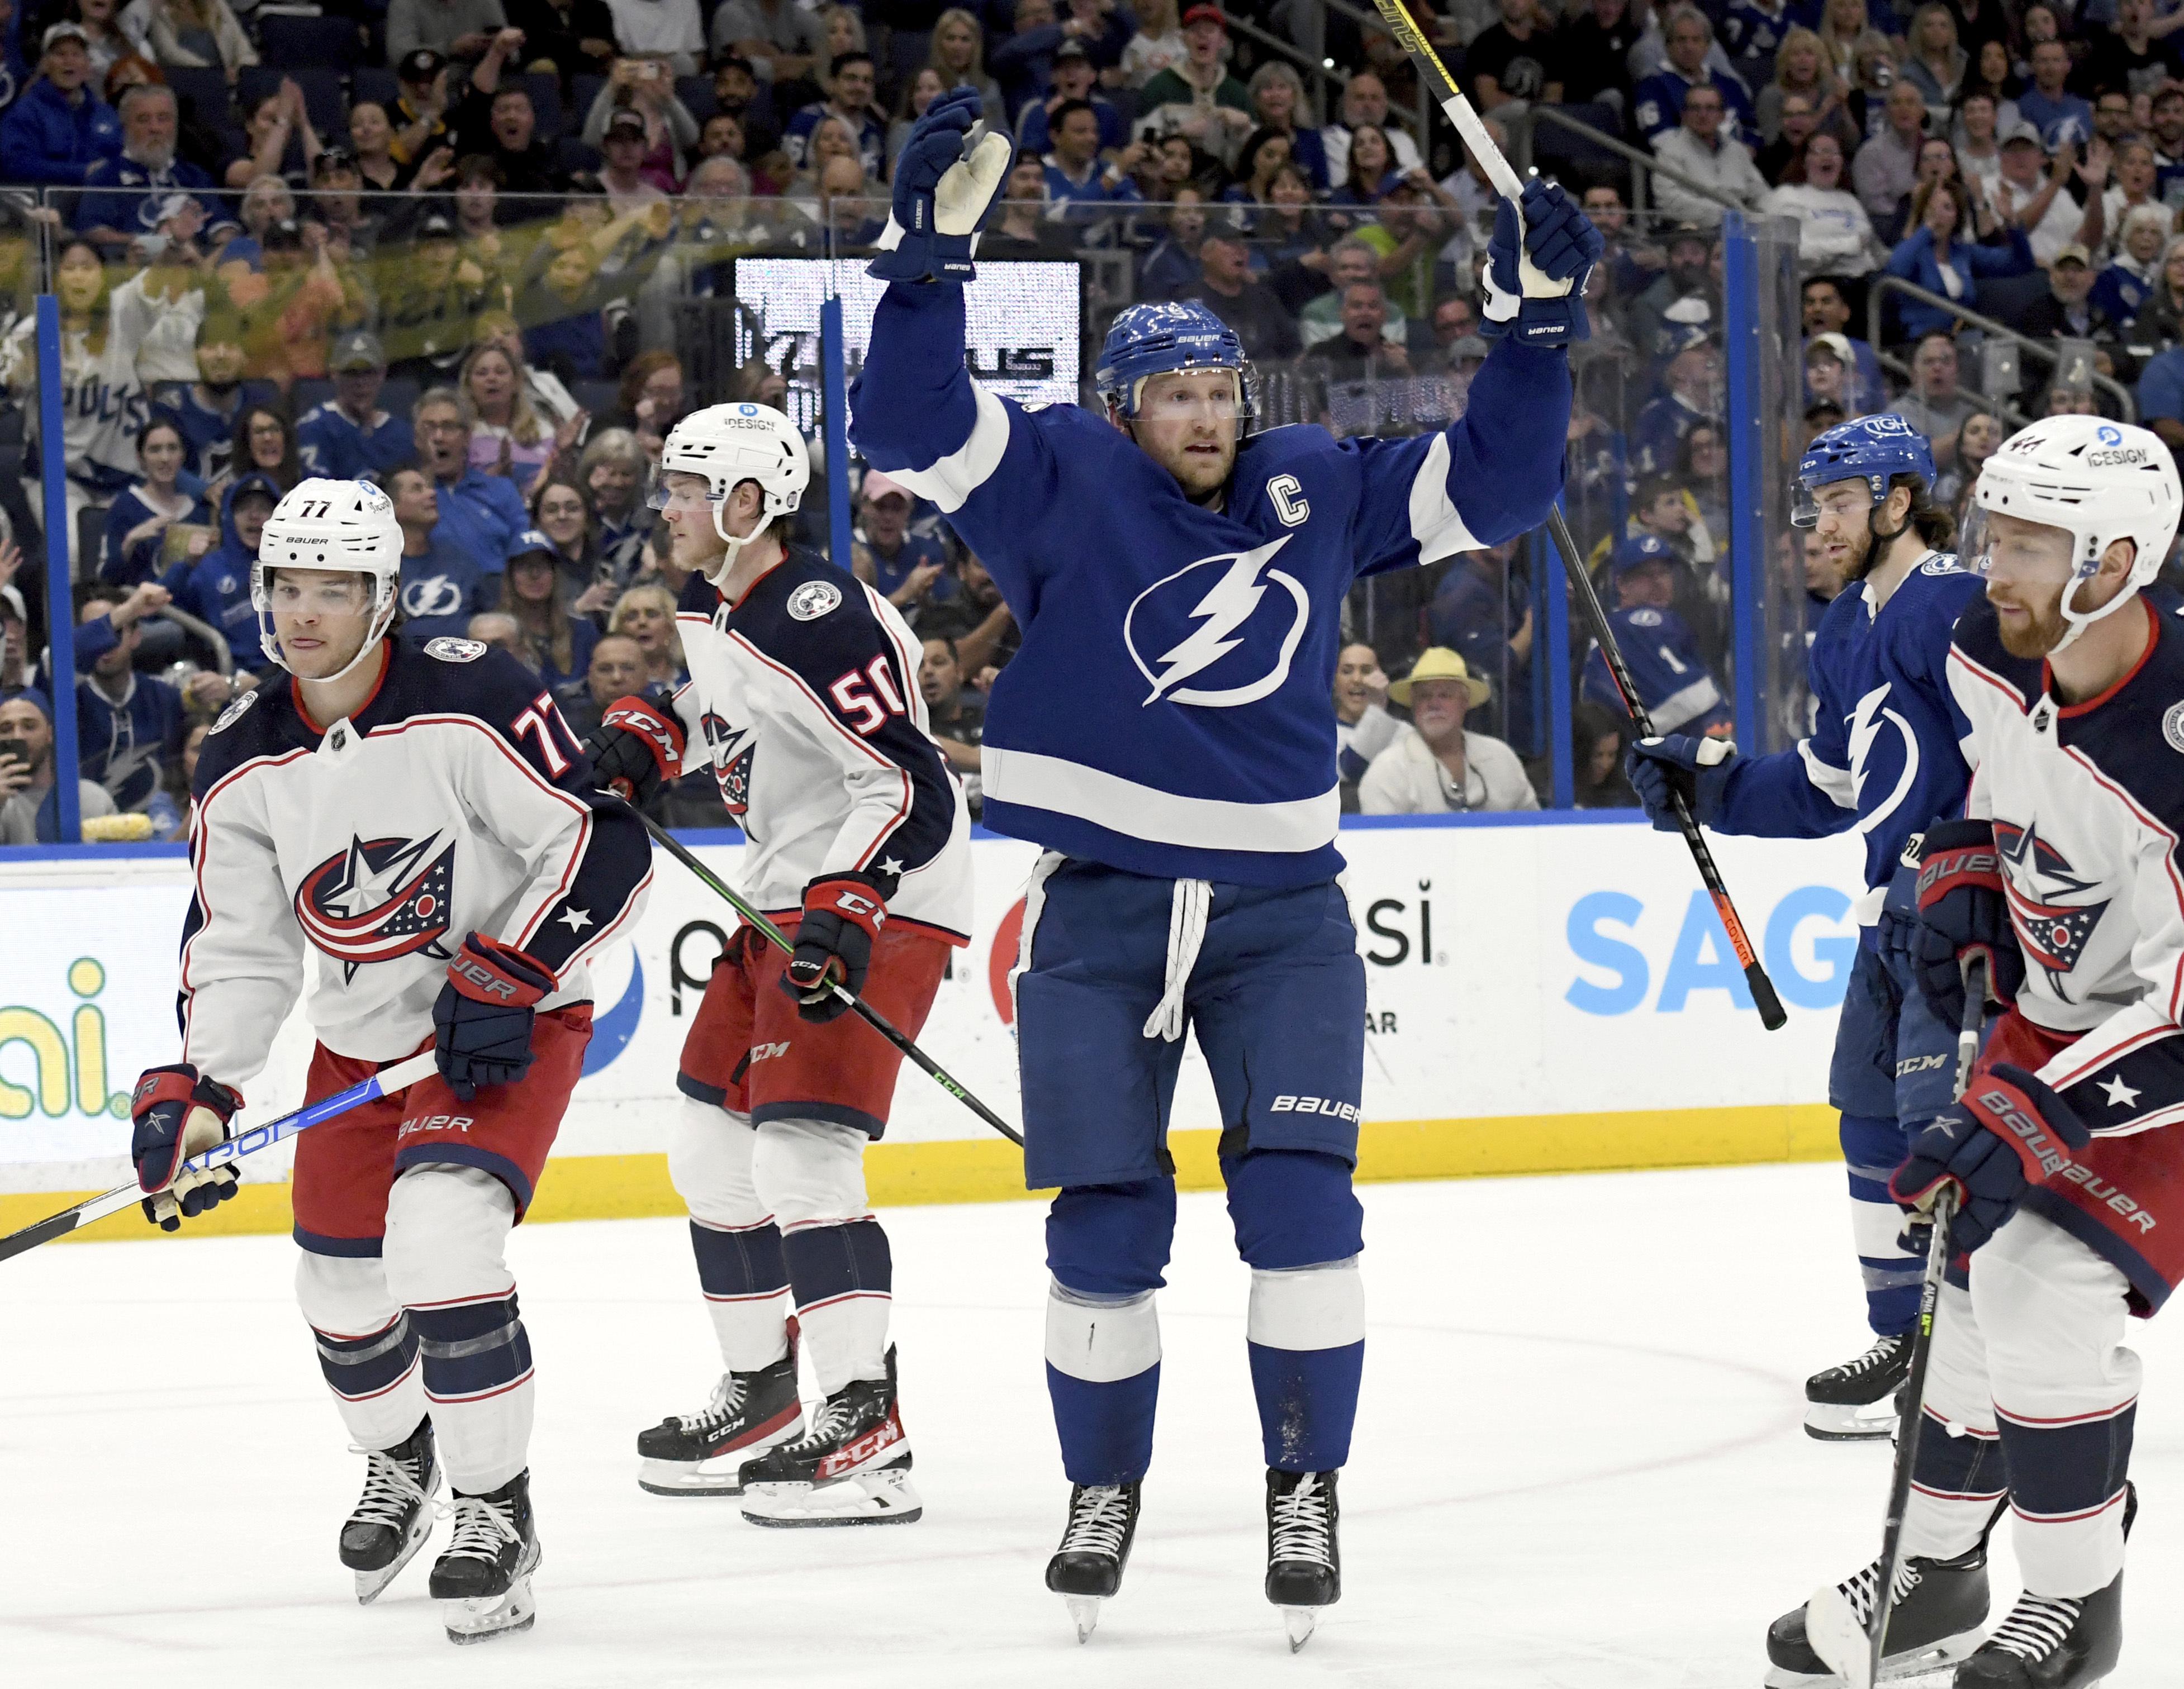 NHL playoffs see jump in TV ratings as Lightning go for three-peat, Battle of Alberta rages on